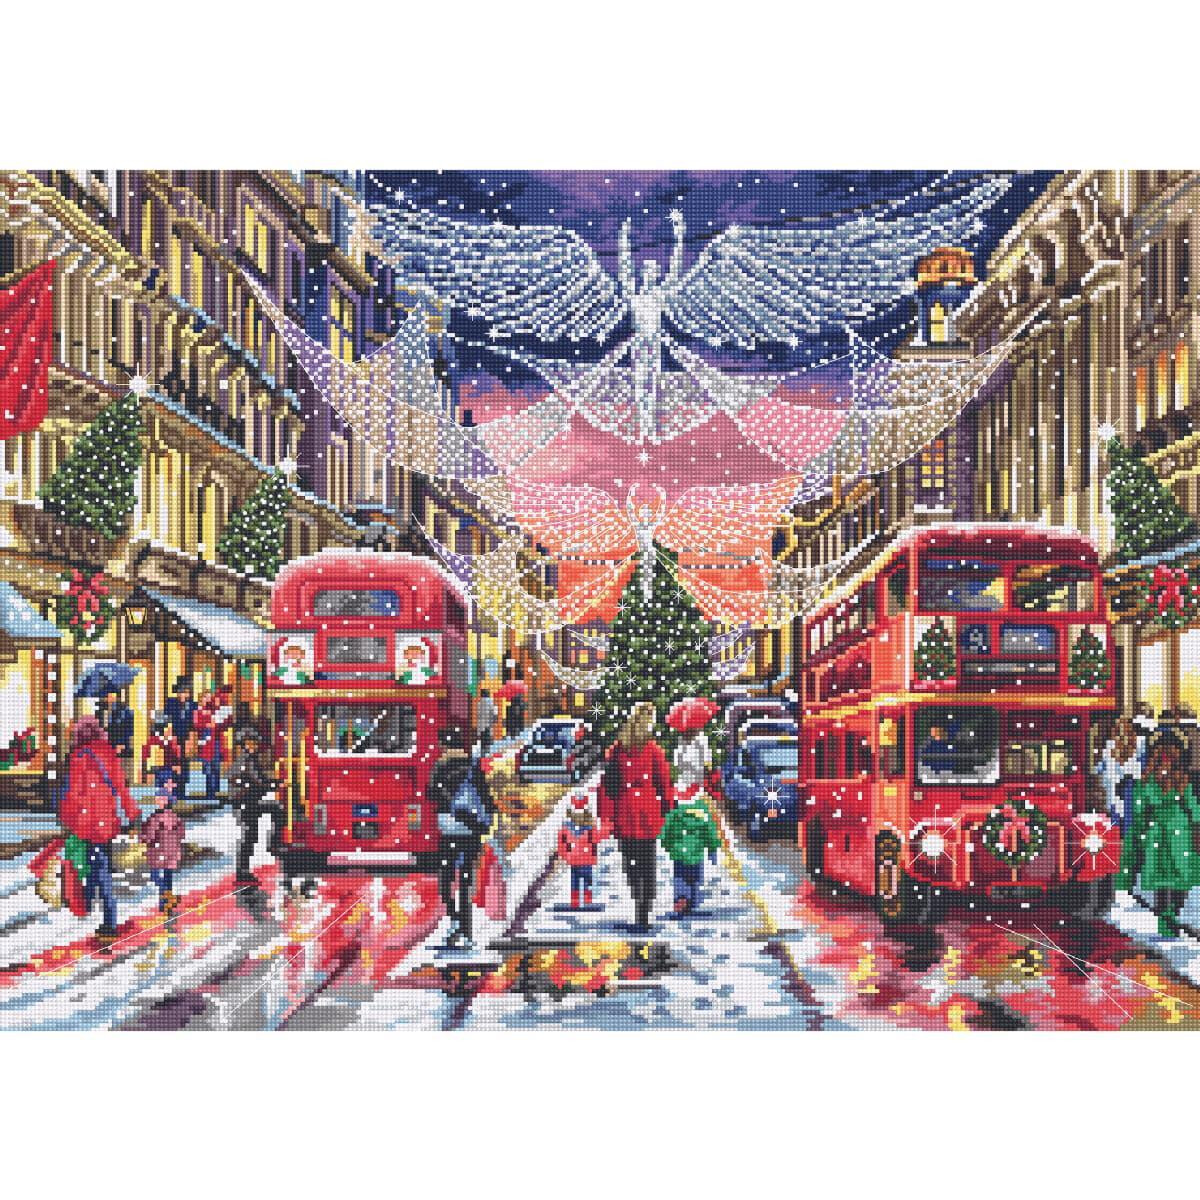 A festive street scene shows two iconic red double-decker...